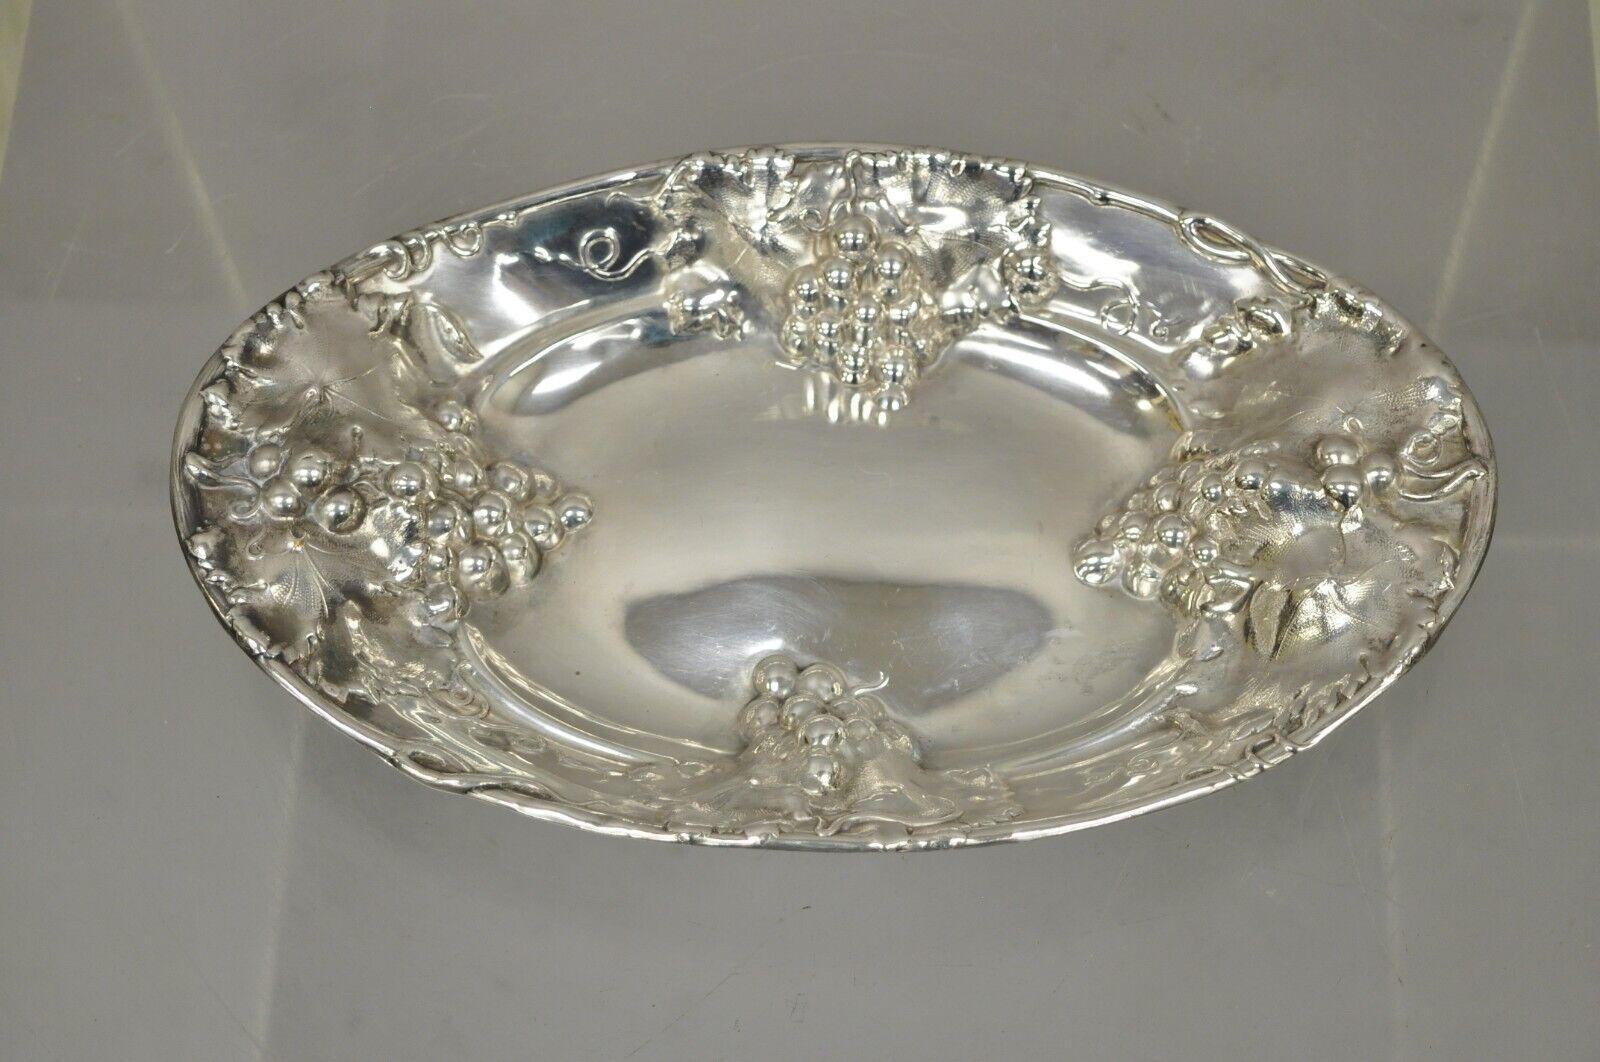 Homan Mfg Co. 1685 Silver Plate Repousse Victorian Embossed Grapevine Dish In Good Condition For Sale In Philadelphia, PA